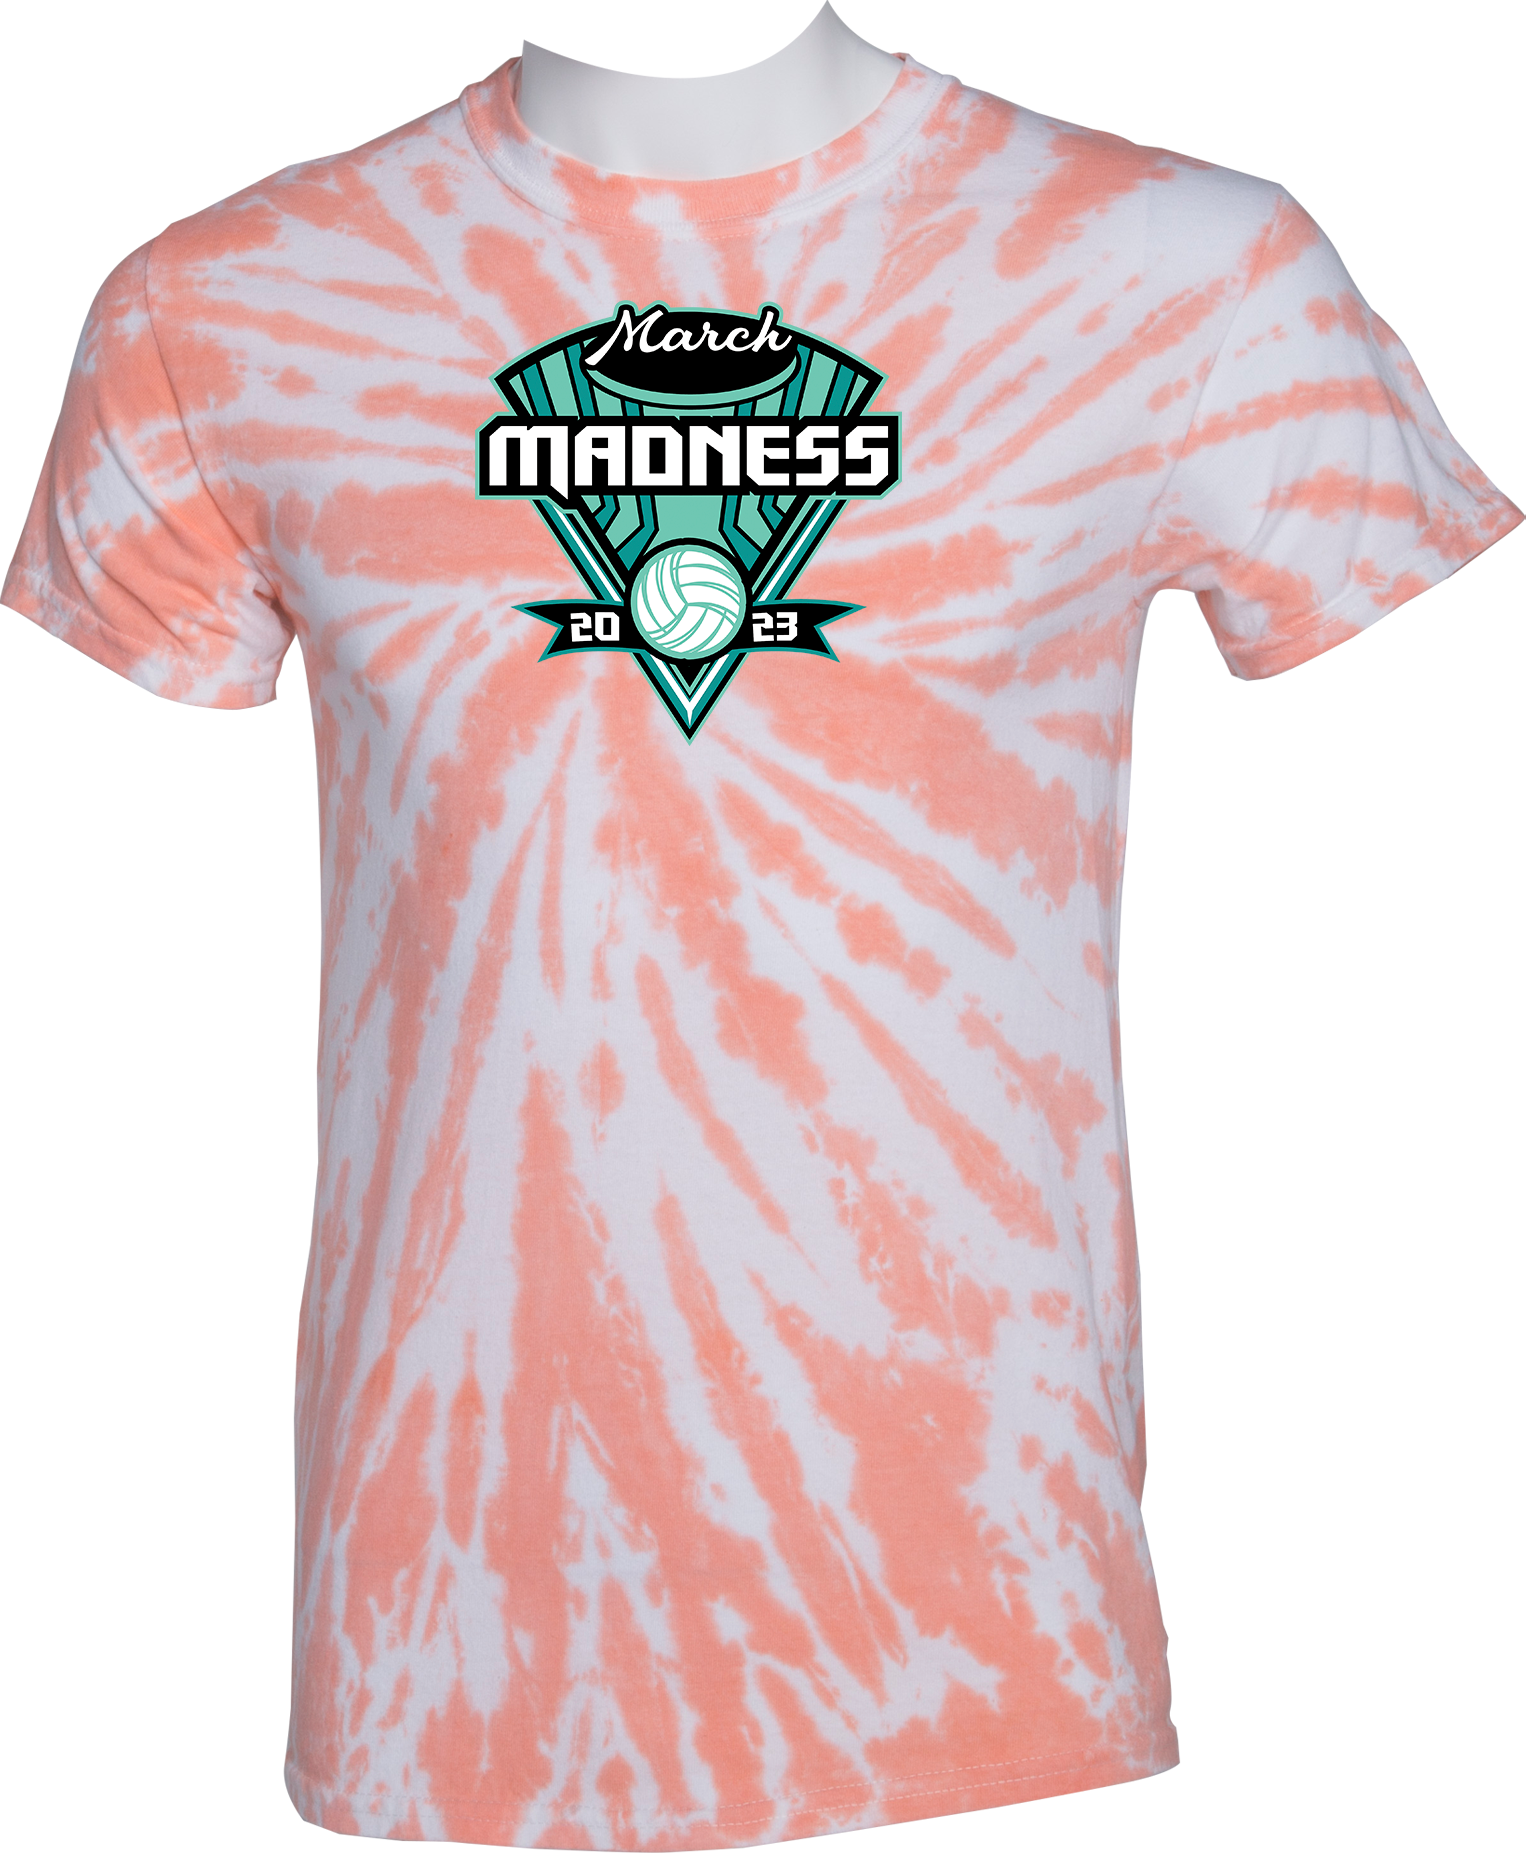 TIE-DYE SHORT SLEEVES - 2023 March Madness